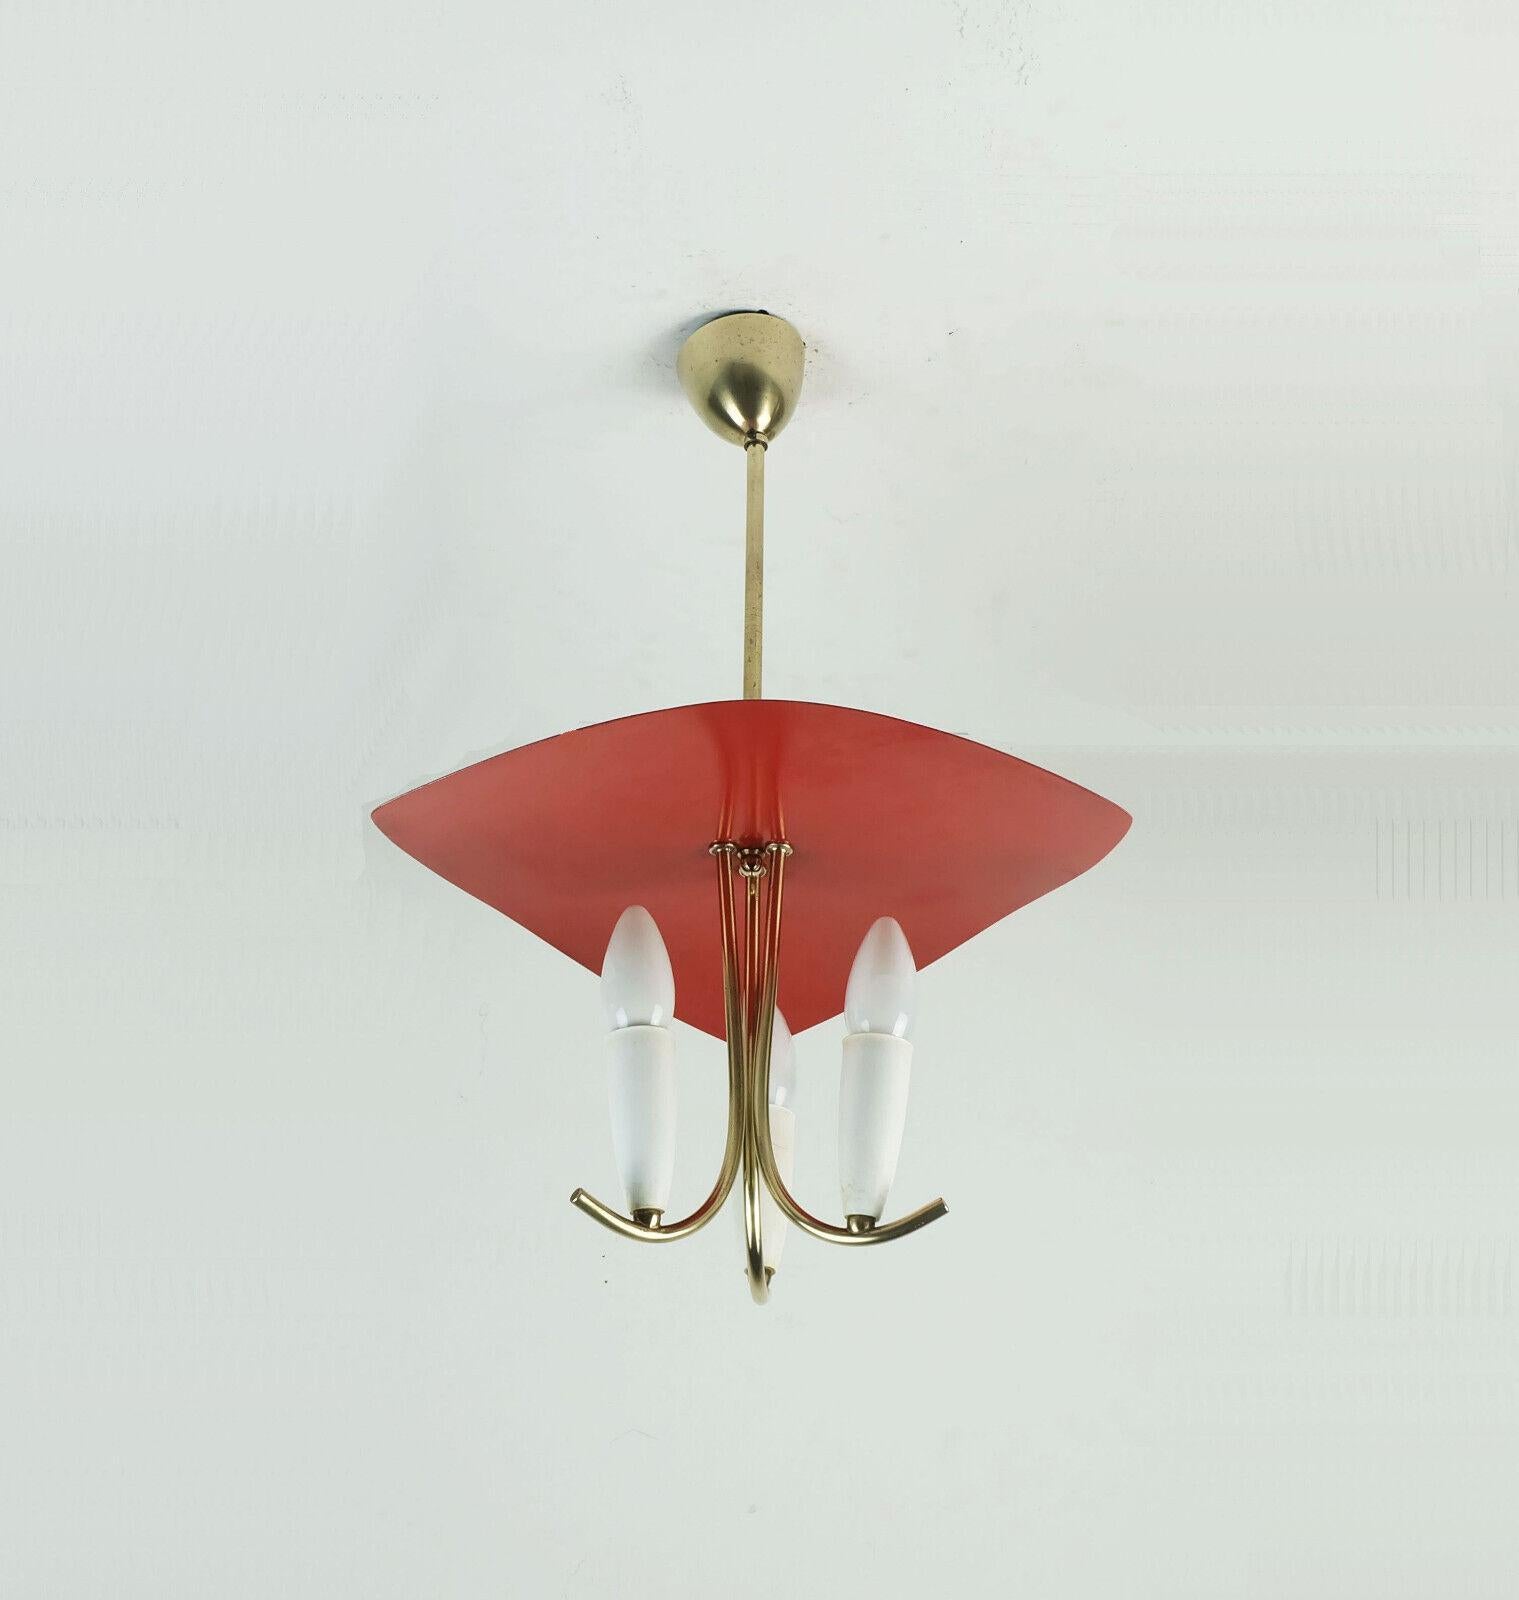 Very beautiful 1950s ceiling light. Curved brass frame with 3 arms. The sockets are covered by grommets made of white plastic. Above this is a triangular roof made of red lacquered metal. For light bulbs with E14 thread. 

Dimensions in cm:
Length